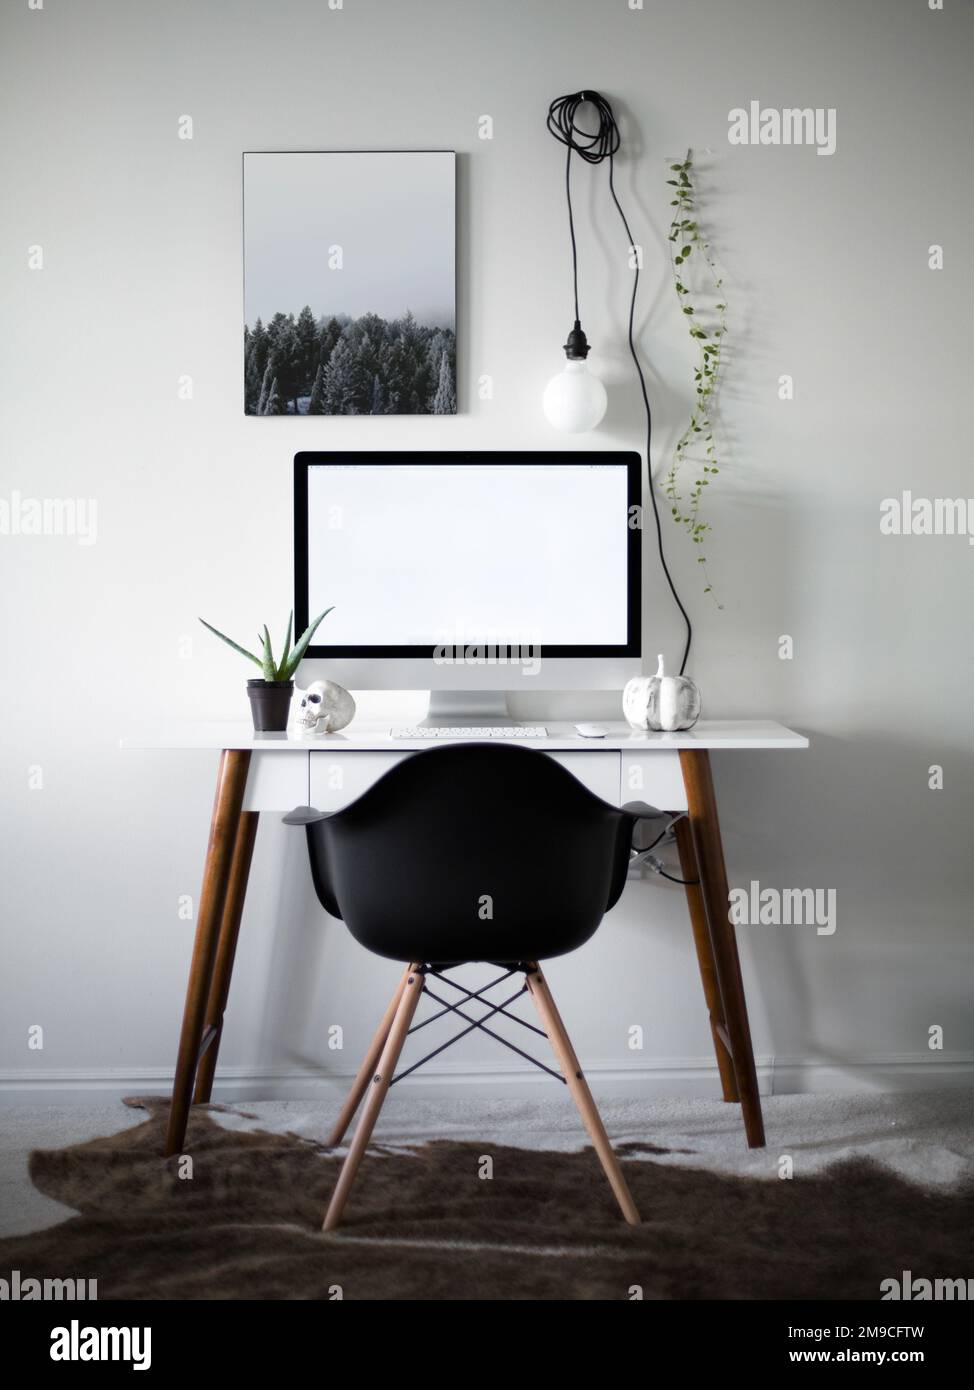 Minimal black and white office desk with plants and skulls decor Stock Photo